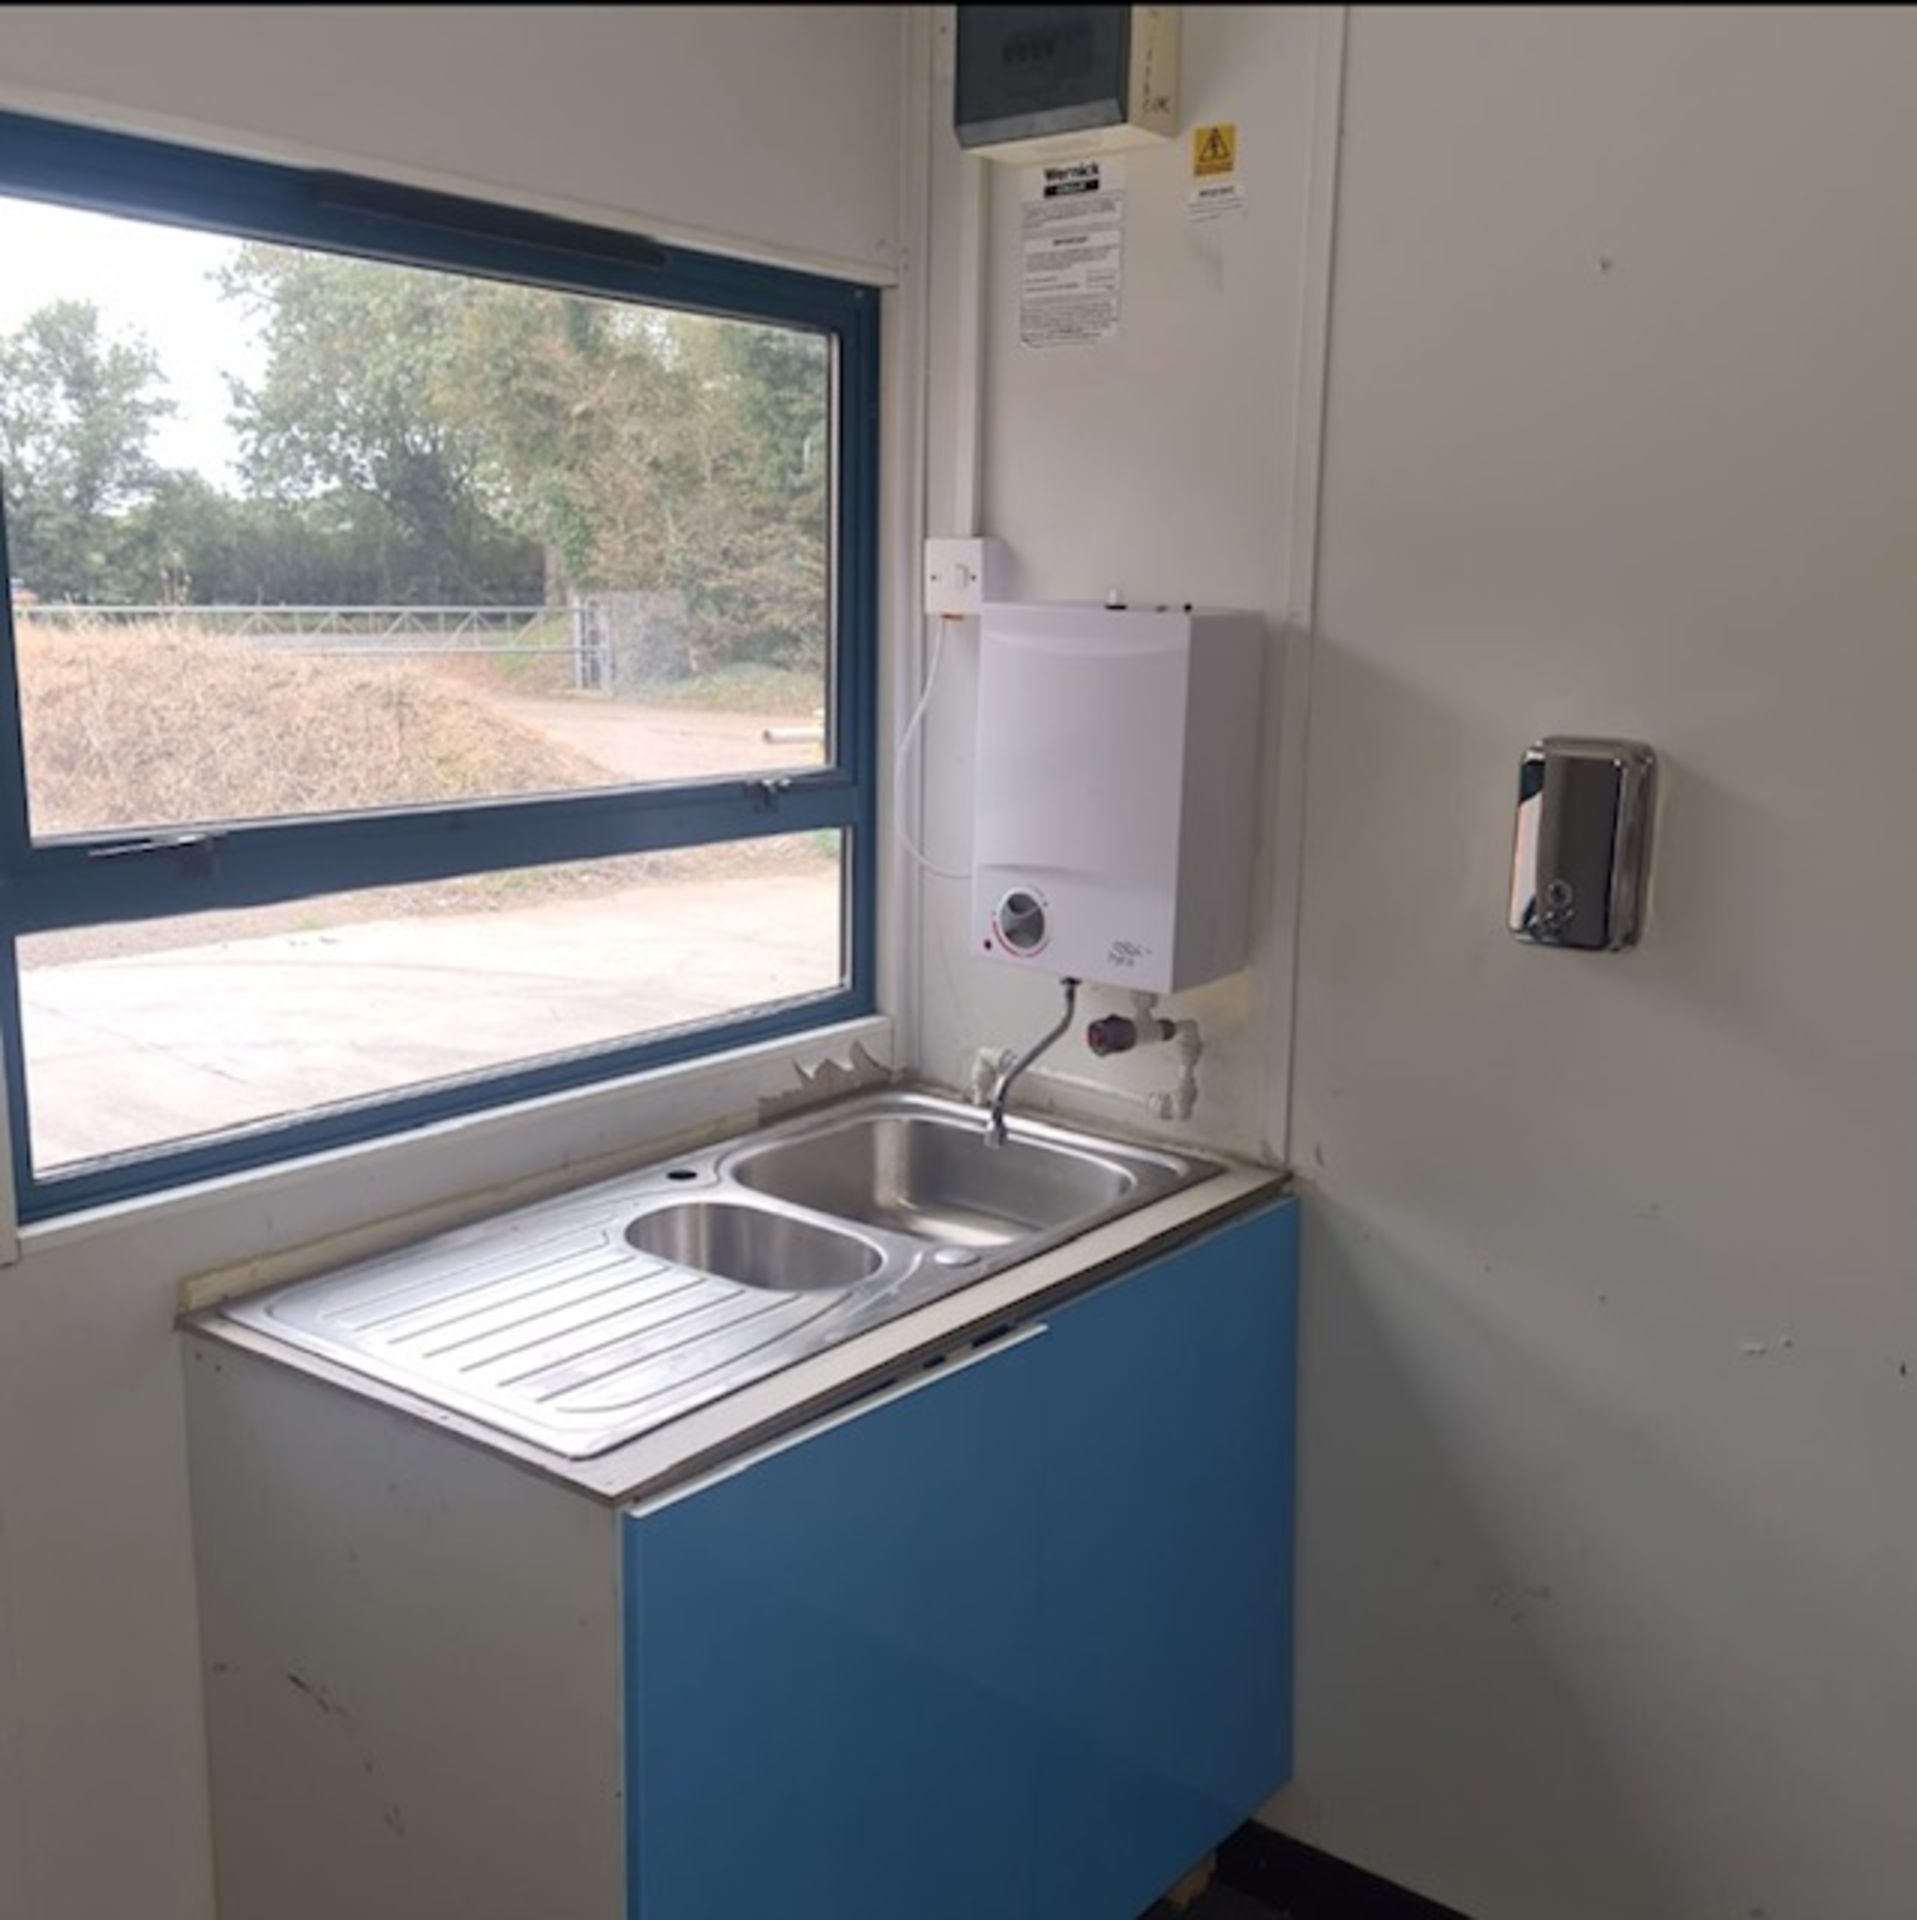 Site office Cabin, 4890mm (l) x 2940mm (w) x 2740mm (h). Fitted sink with water heater & 240v power. - Image 4 of 9